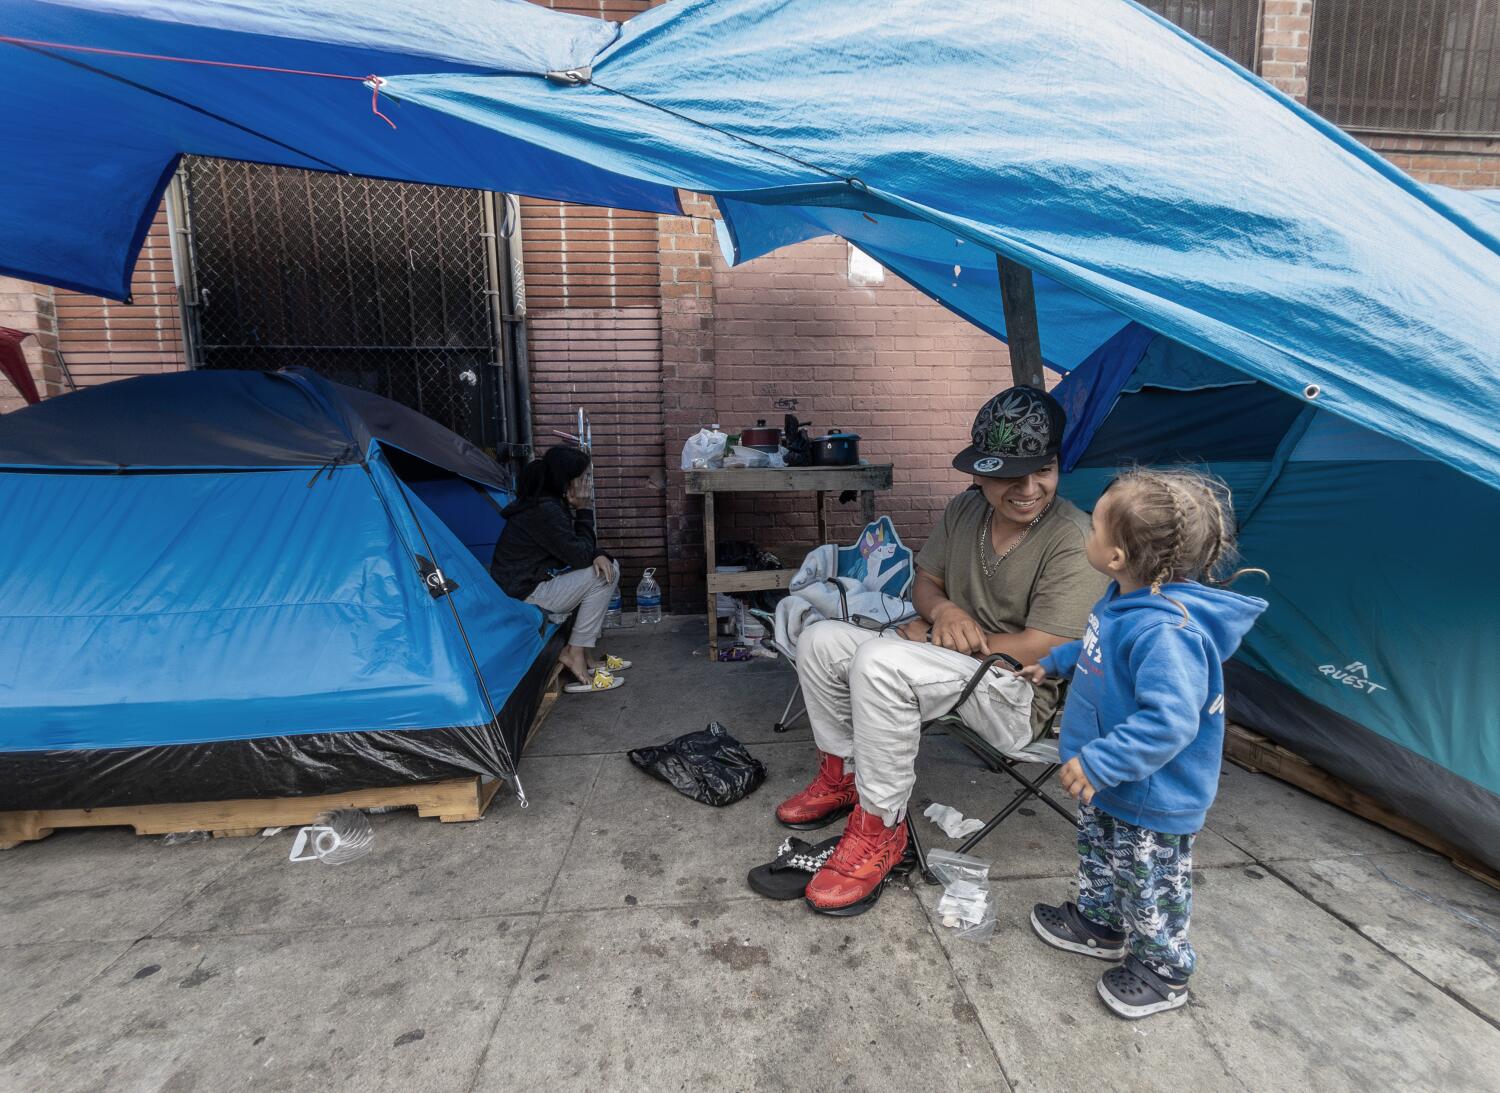 As L.A. County sees an increase in homeless families, agencies are struggling to help